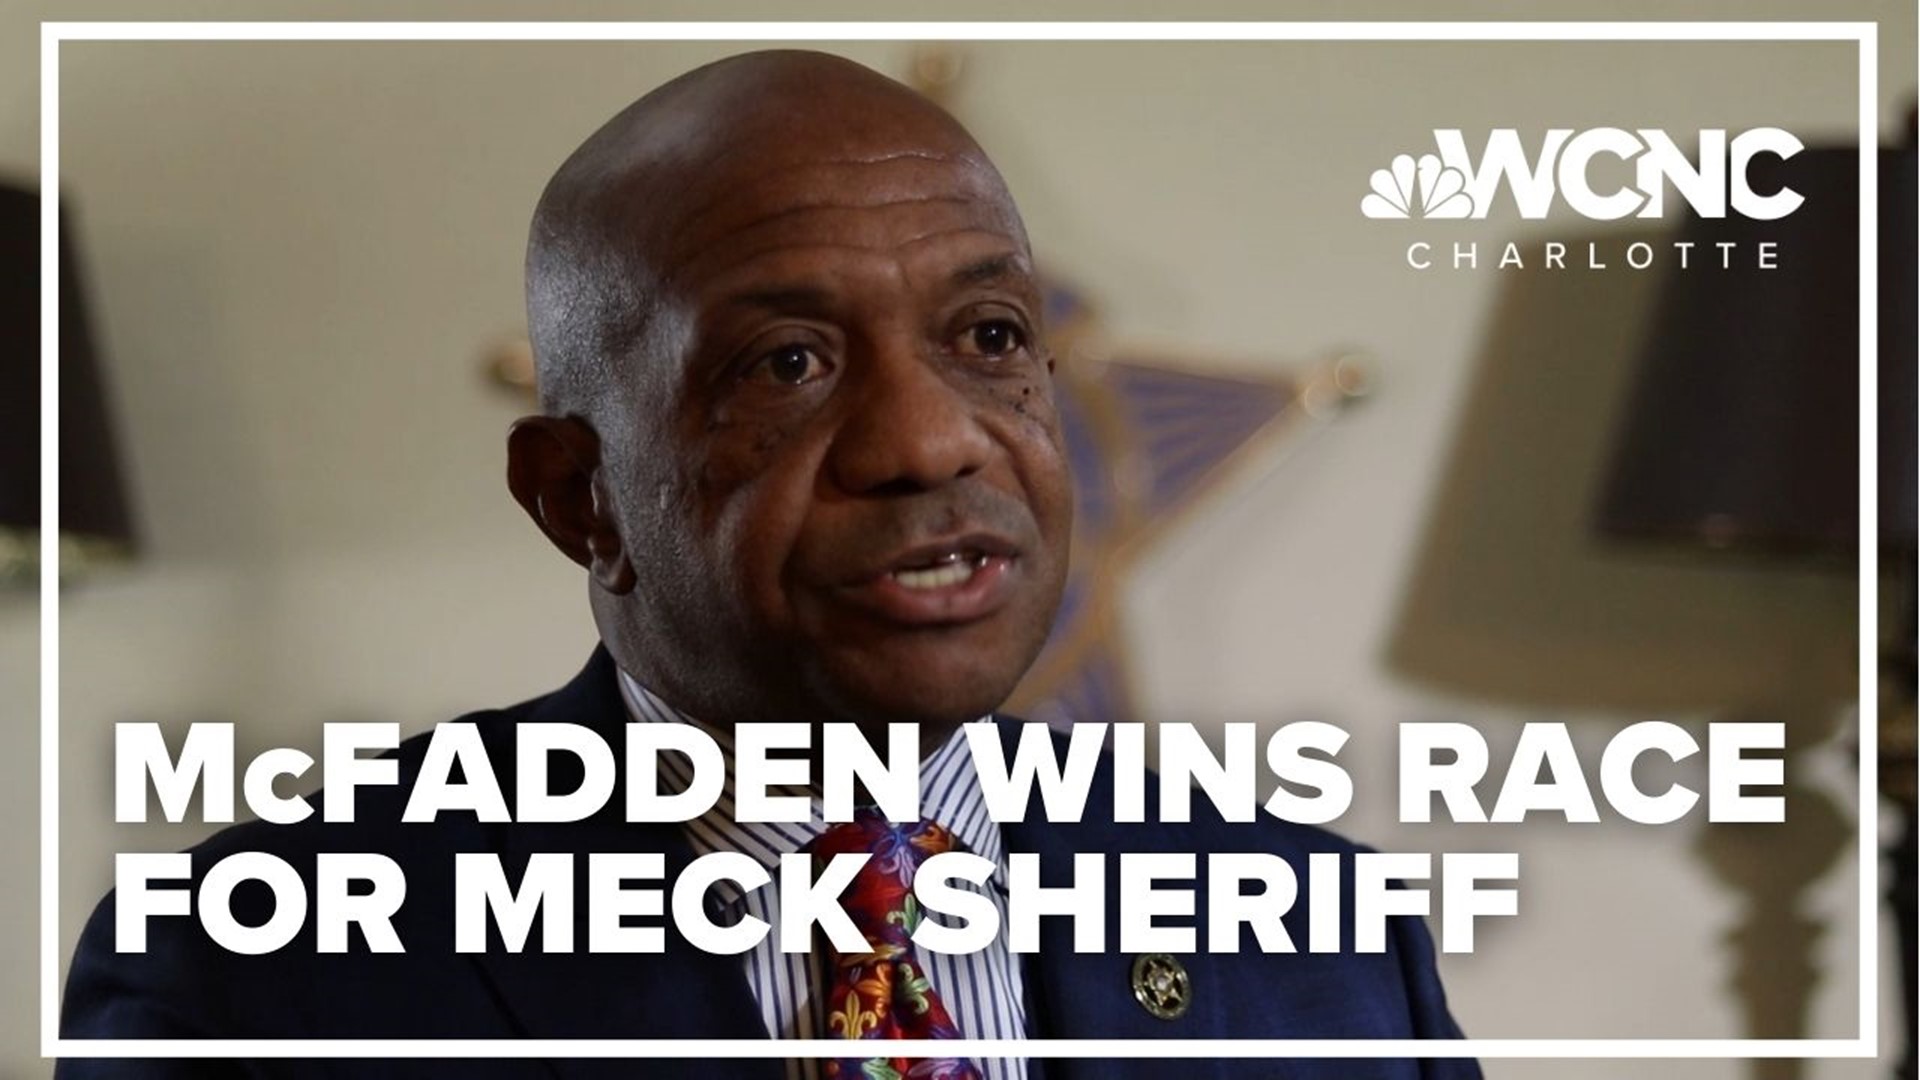 Garry McFadden defeated two challengers to hold onto his seat as Mecklenburg County's sheriff in Tuesday's Democratic primary.